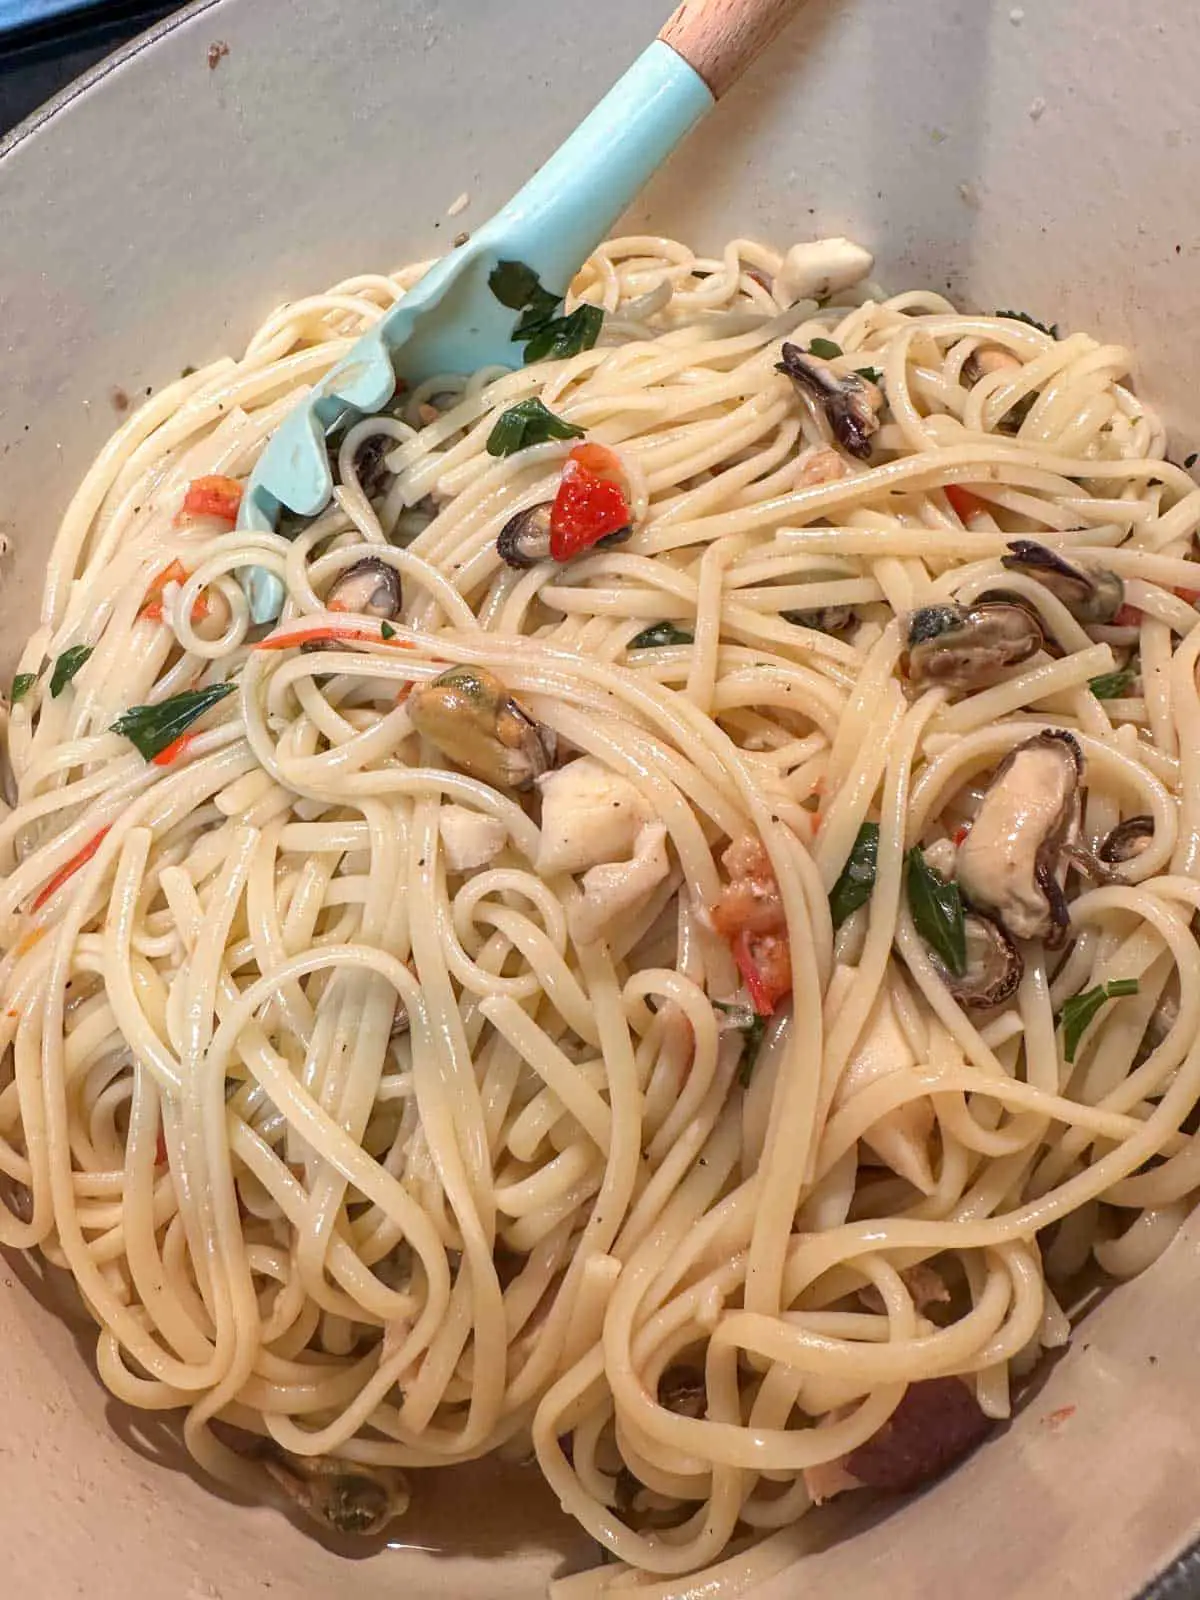 Cooked linguine with seafood mix, chopped tomato and Italian parsley in a Dutch oven. There is a blue pasta spoon with wooden handle resting in the pasta.